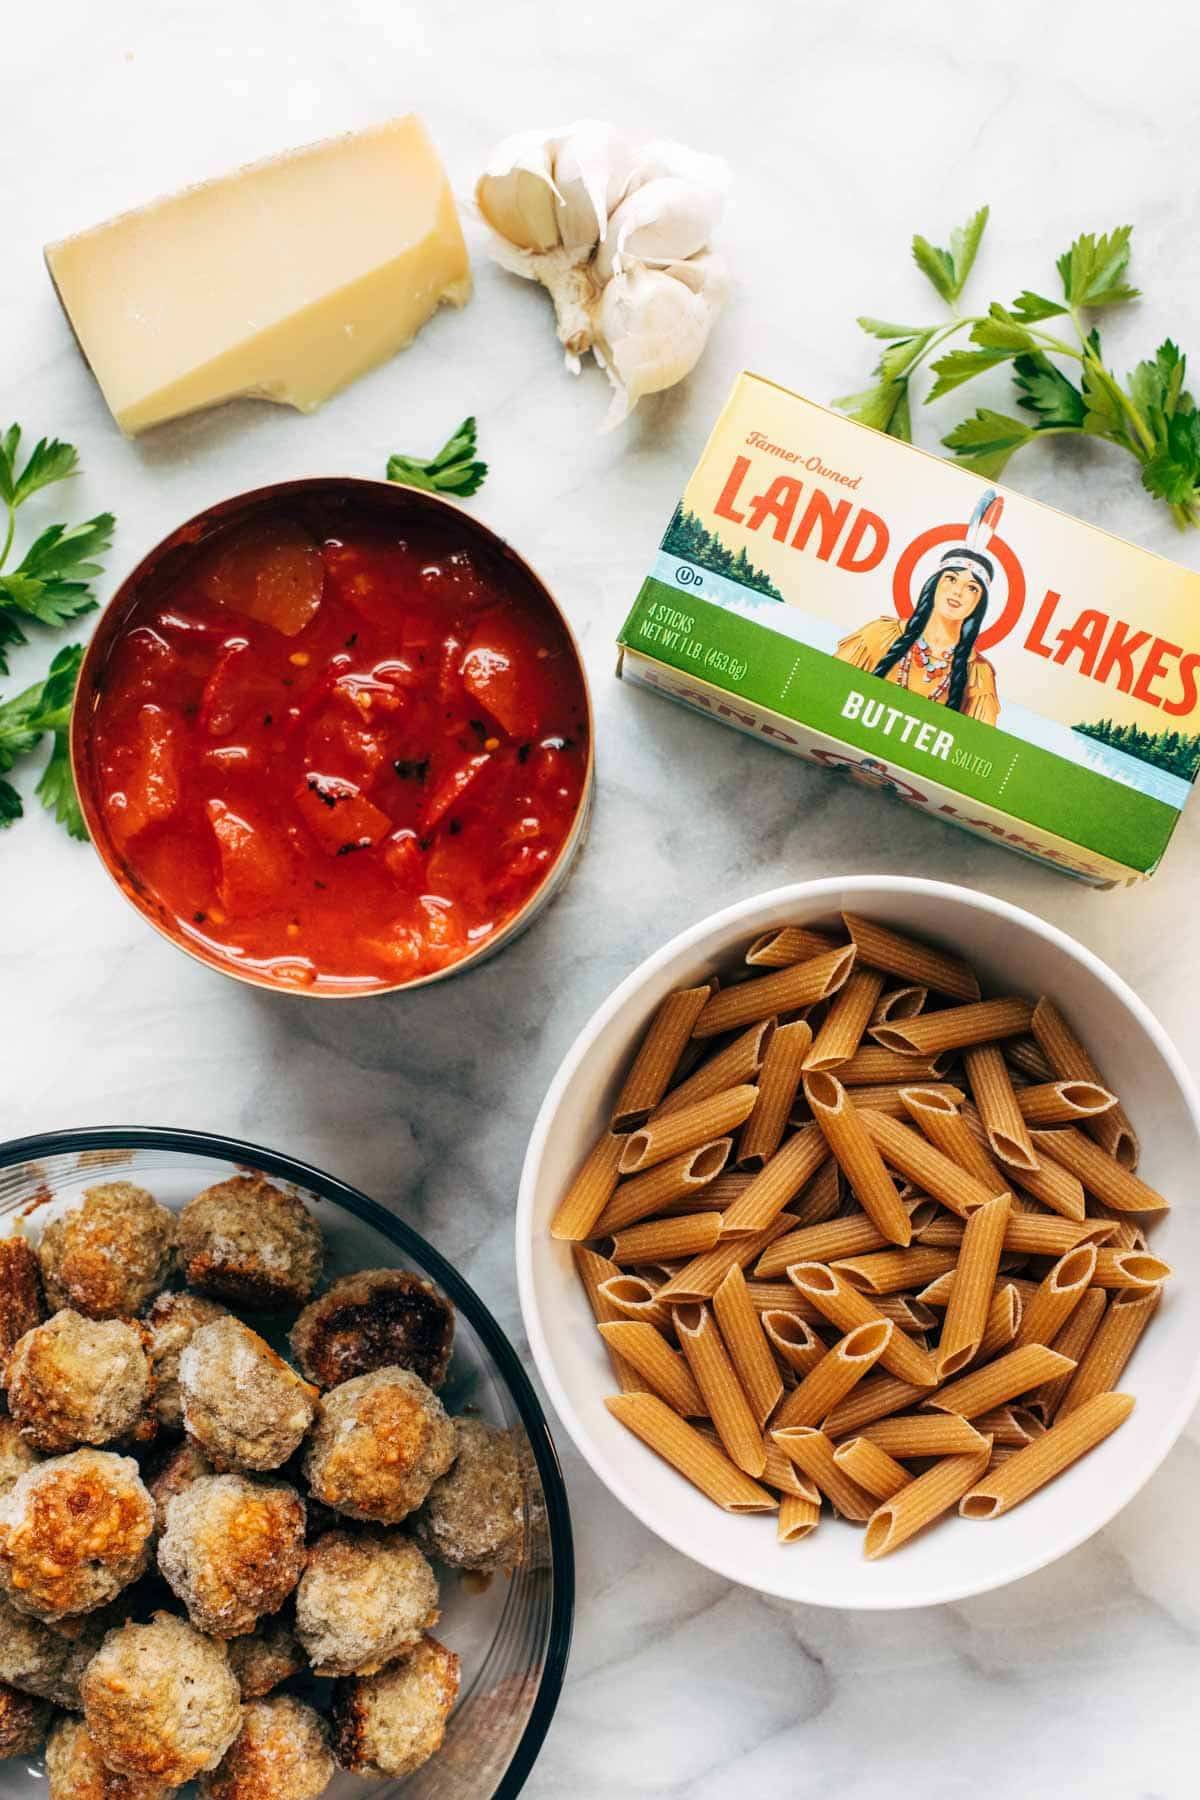 Ingredients for baked penne with meatballs.